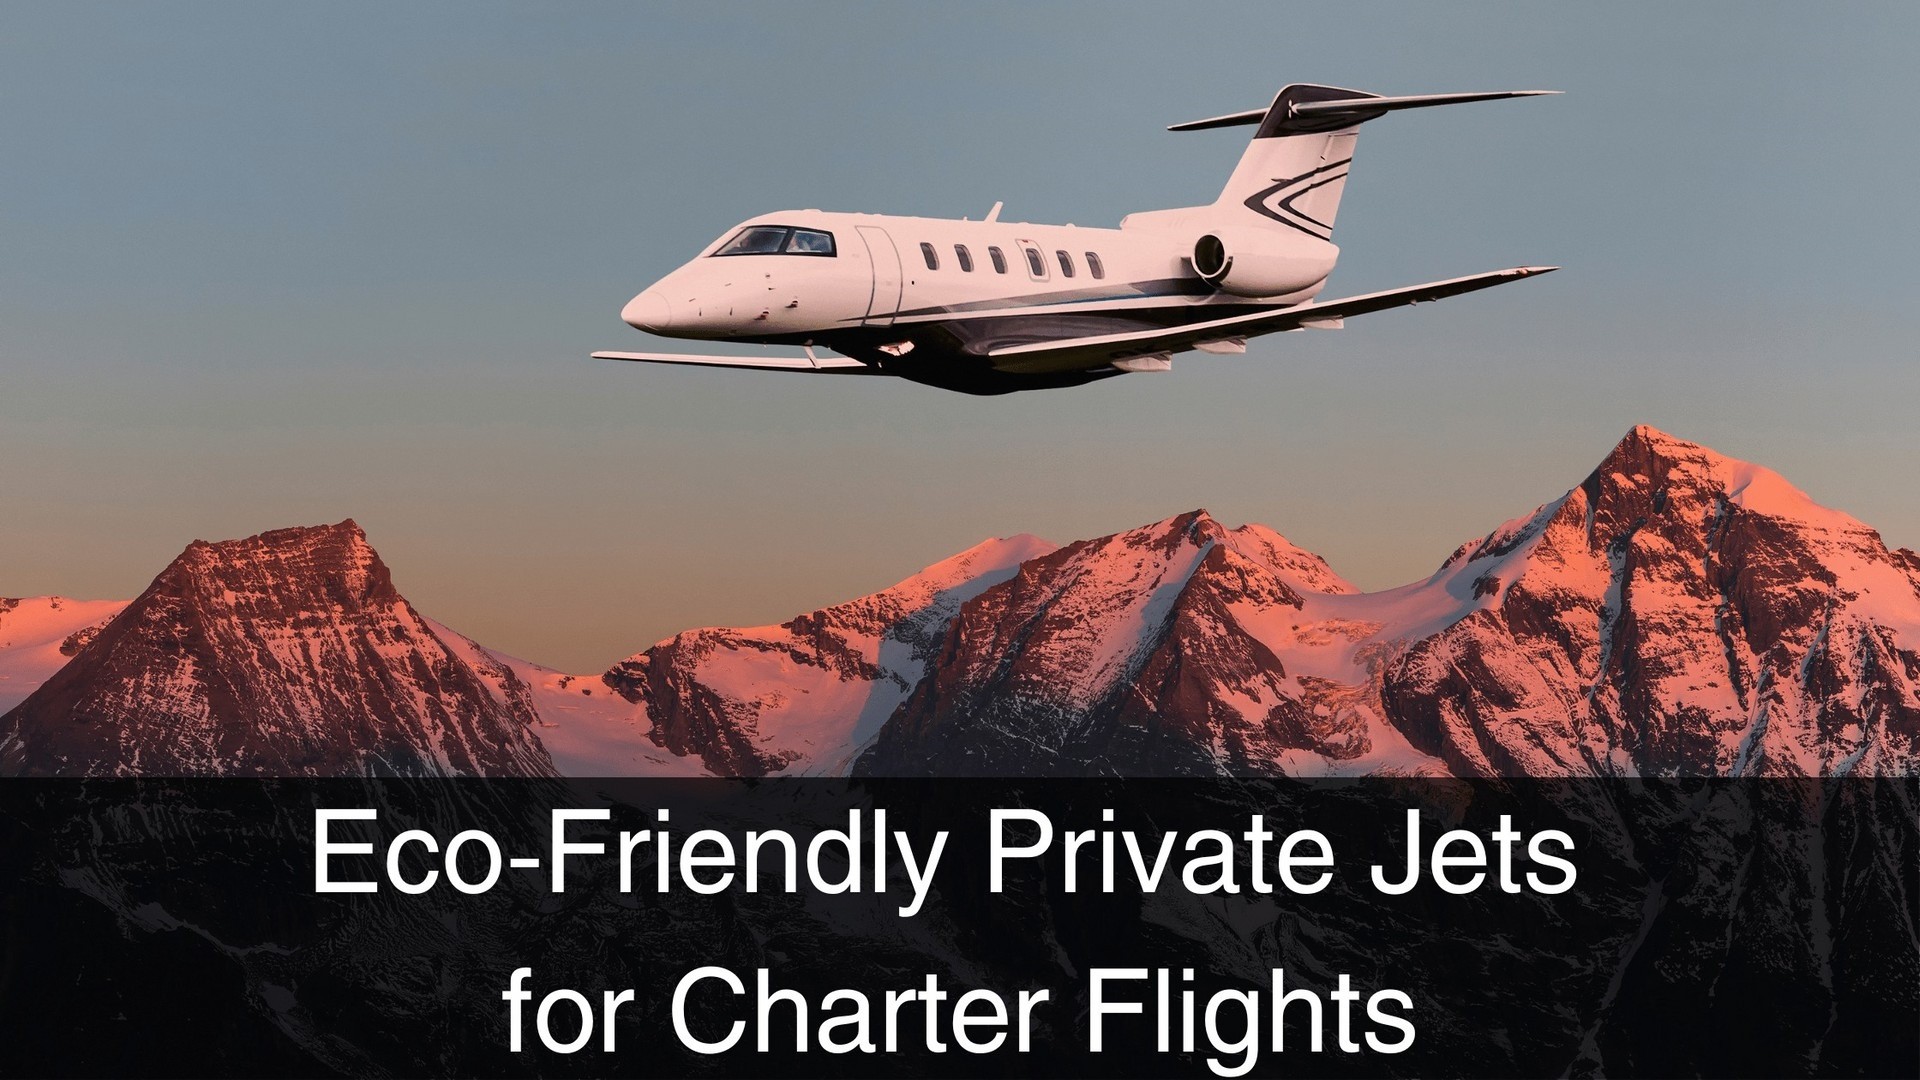 Eco-Friendly Private Jets for Charter Flights